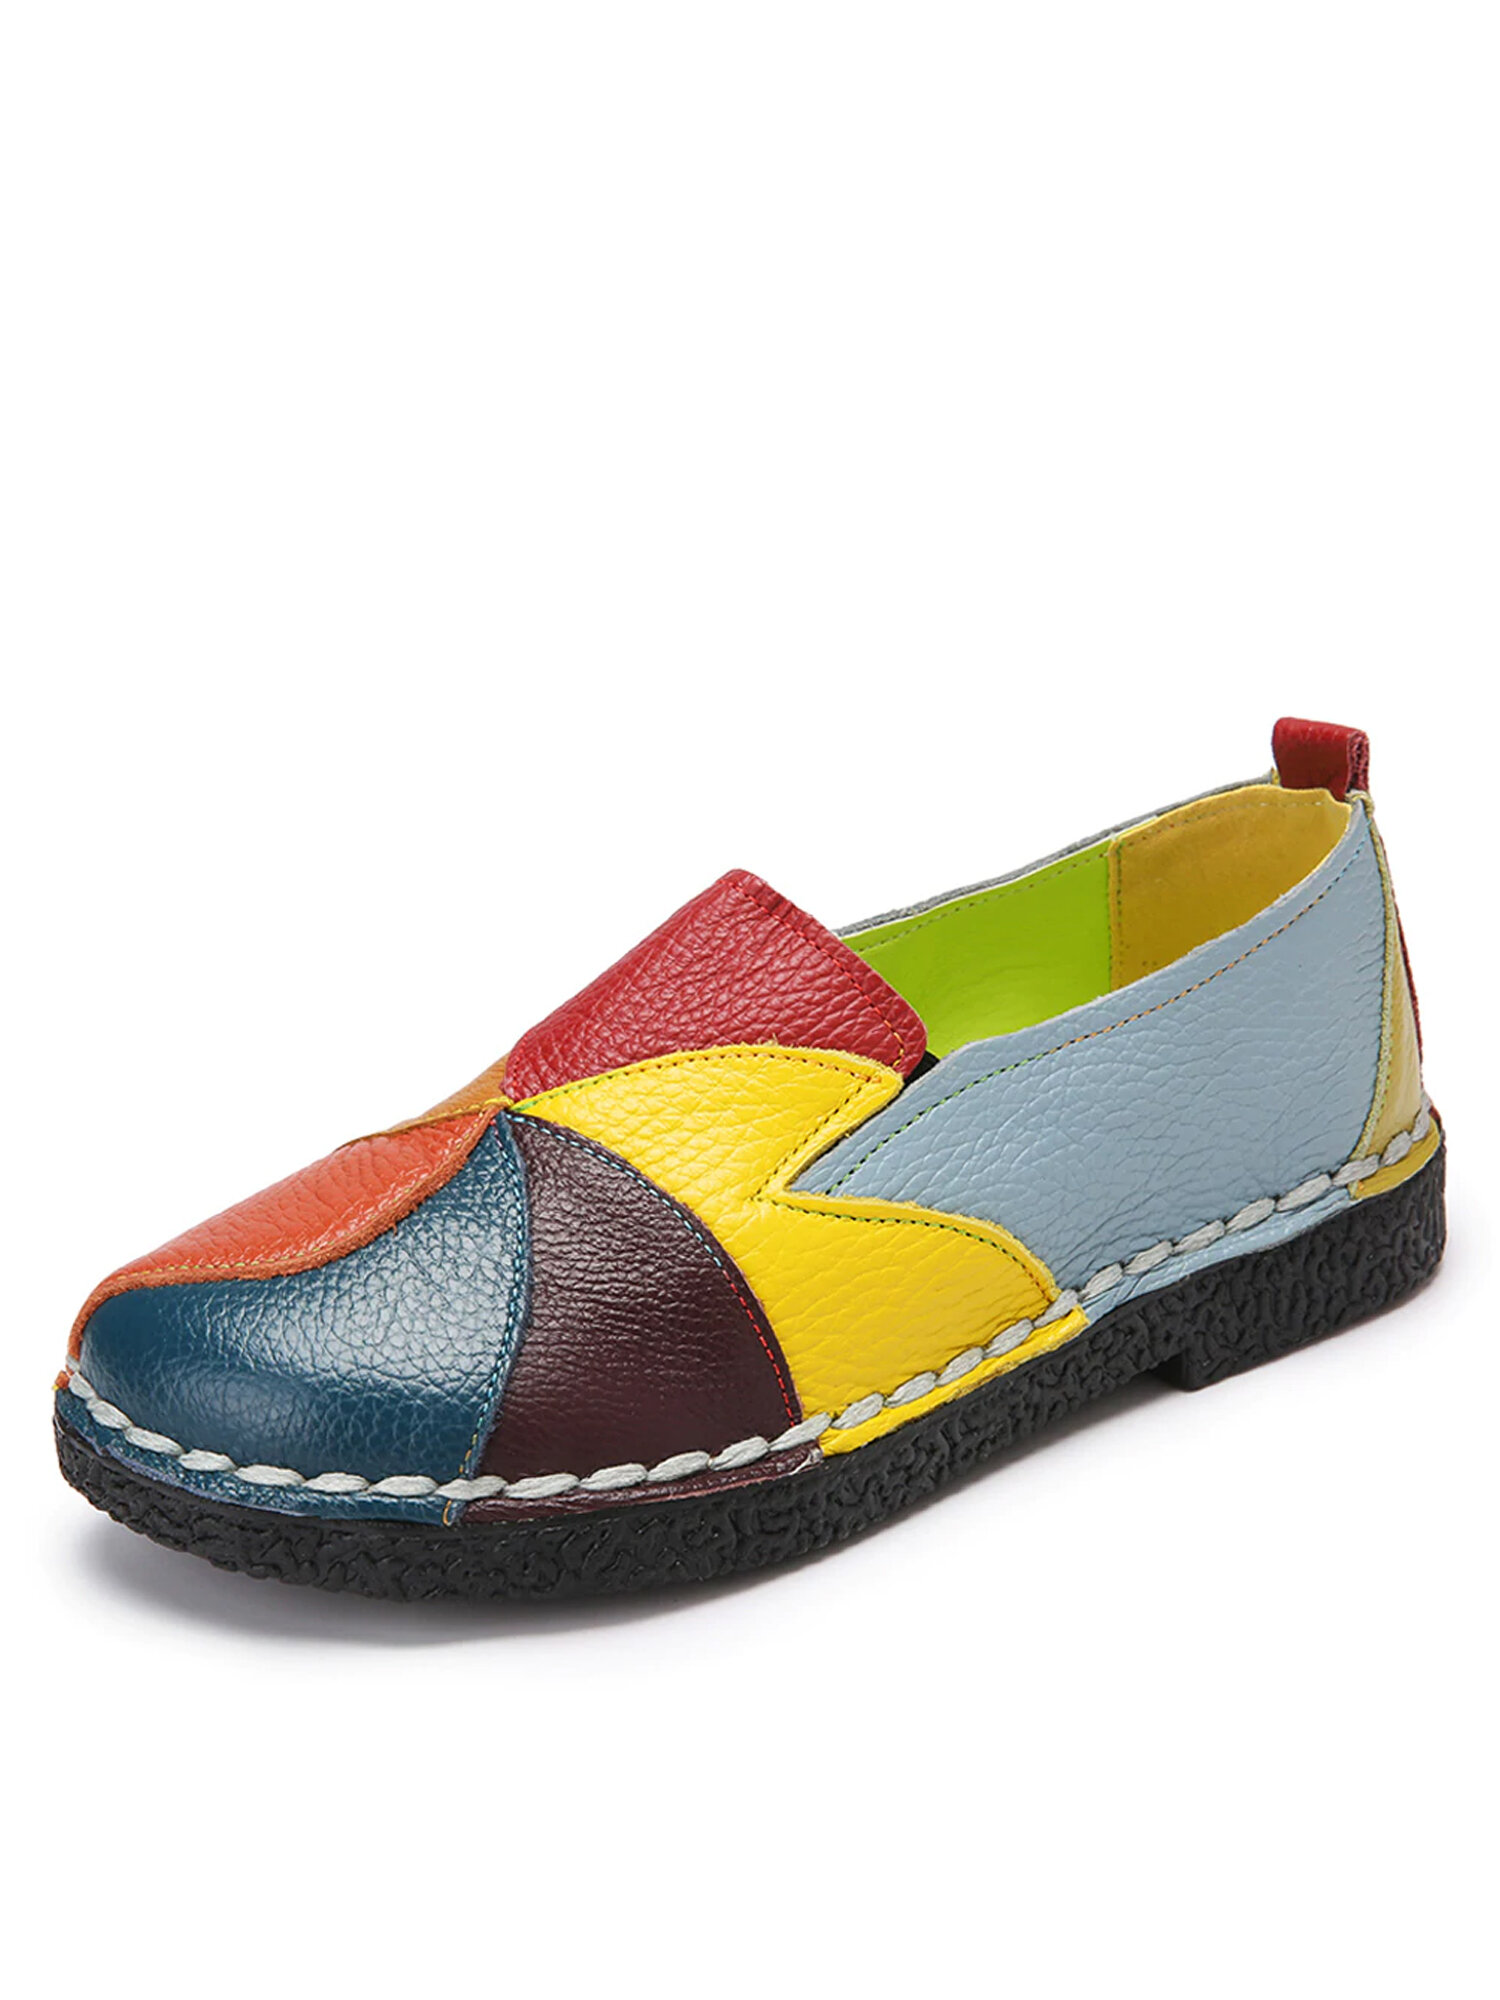 SOCOFY Soft Handmade Splicing Colorful Genuine Leather Stiching Slip On Casual Flat Loafers